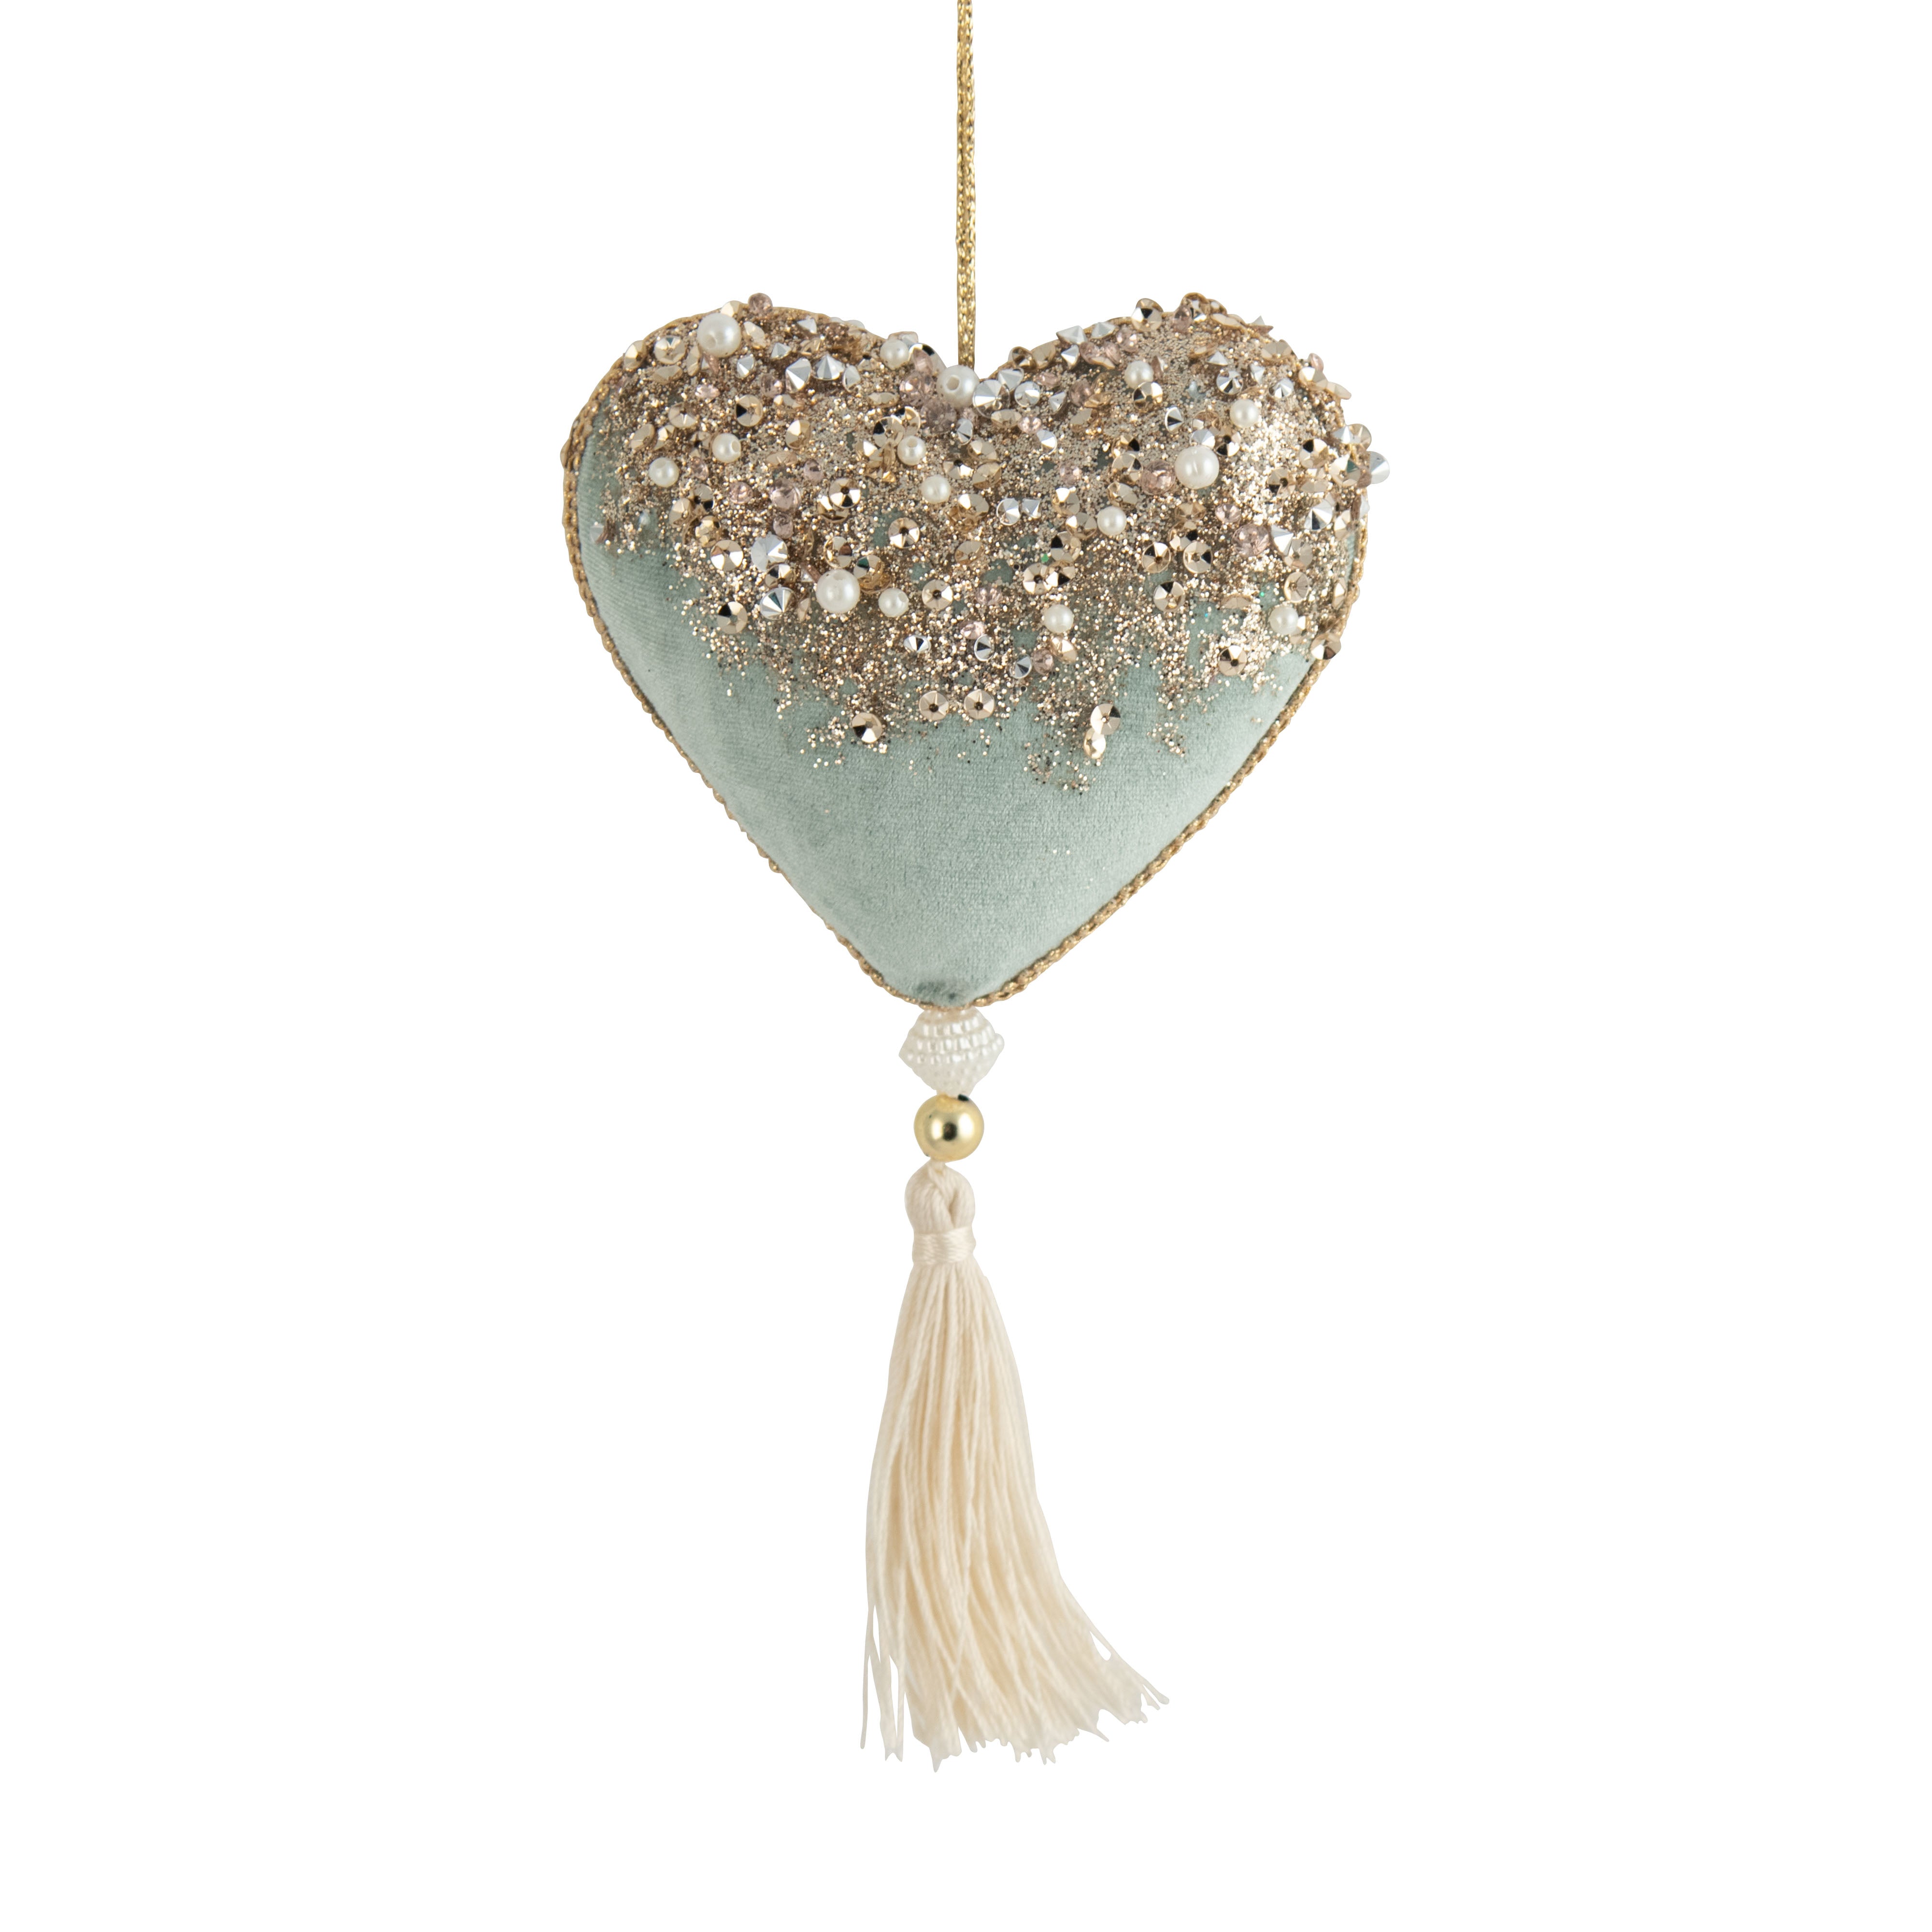 Fabric mint coloured heart hanging ornament - Christmas tree decoration